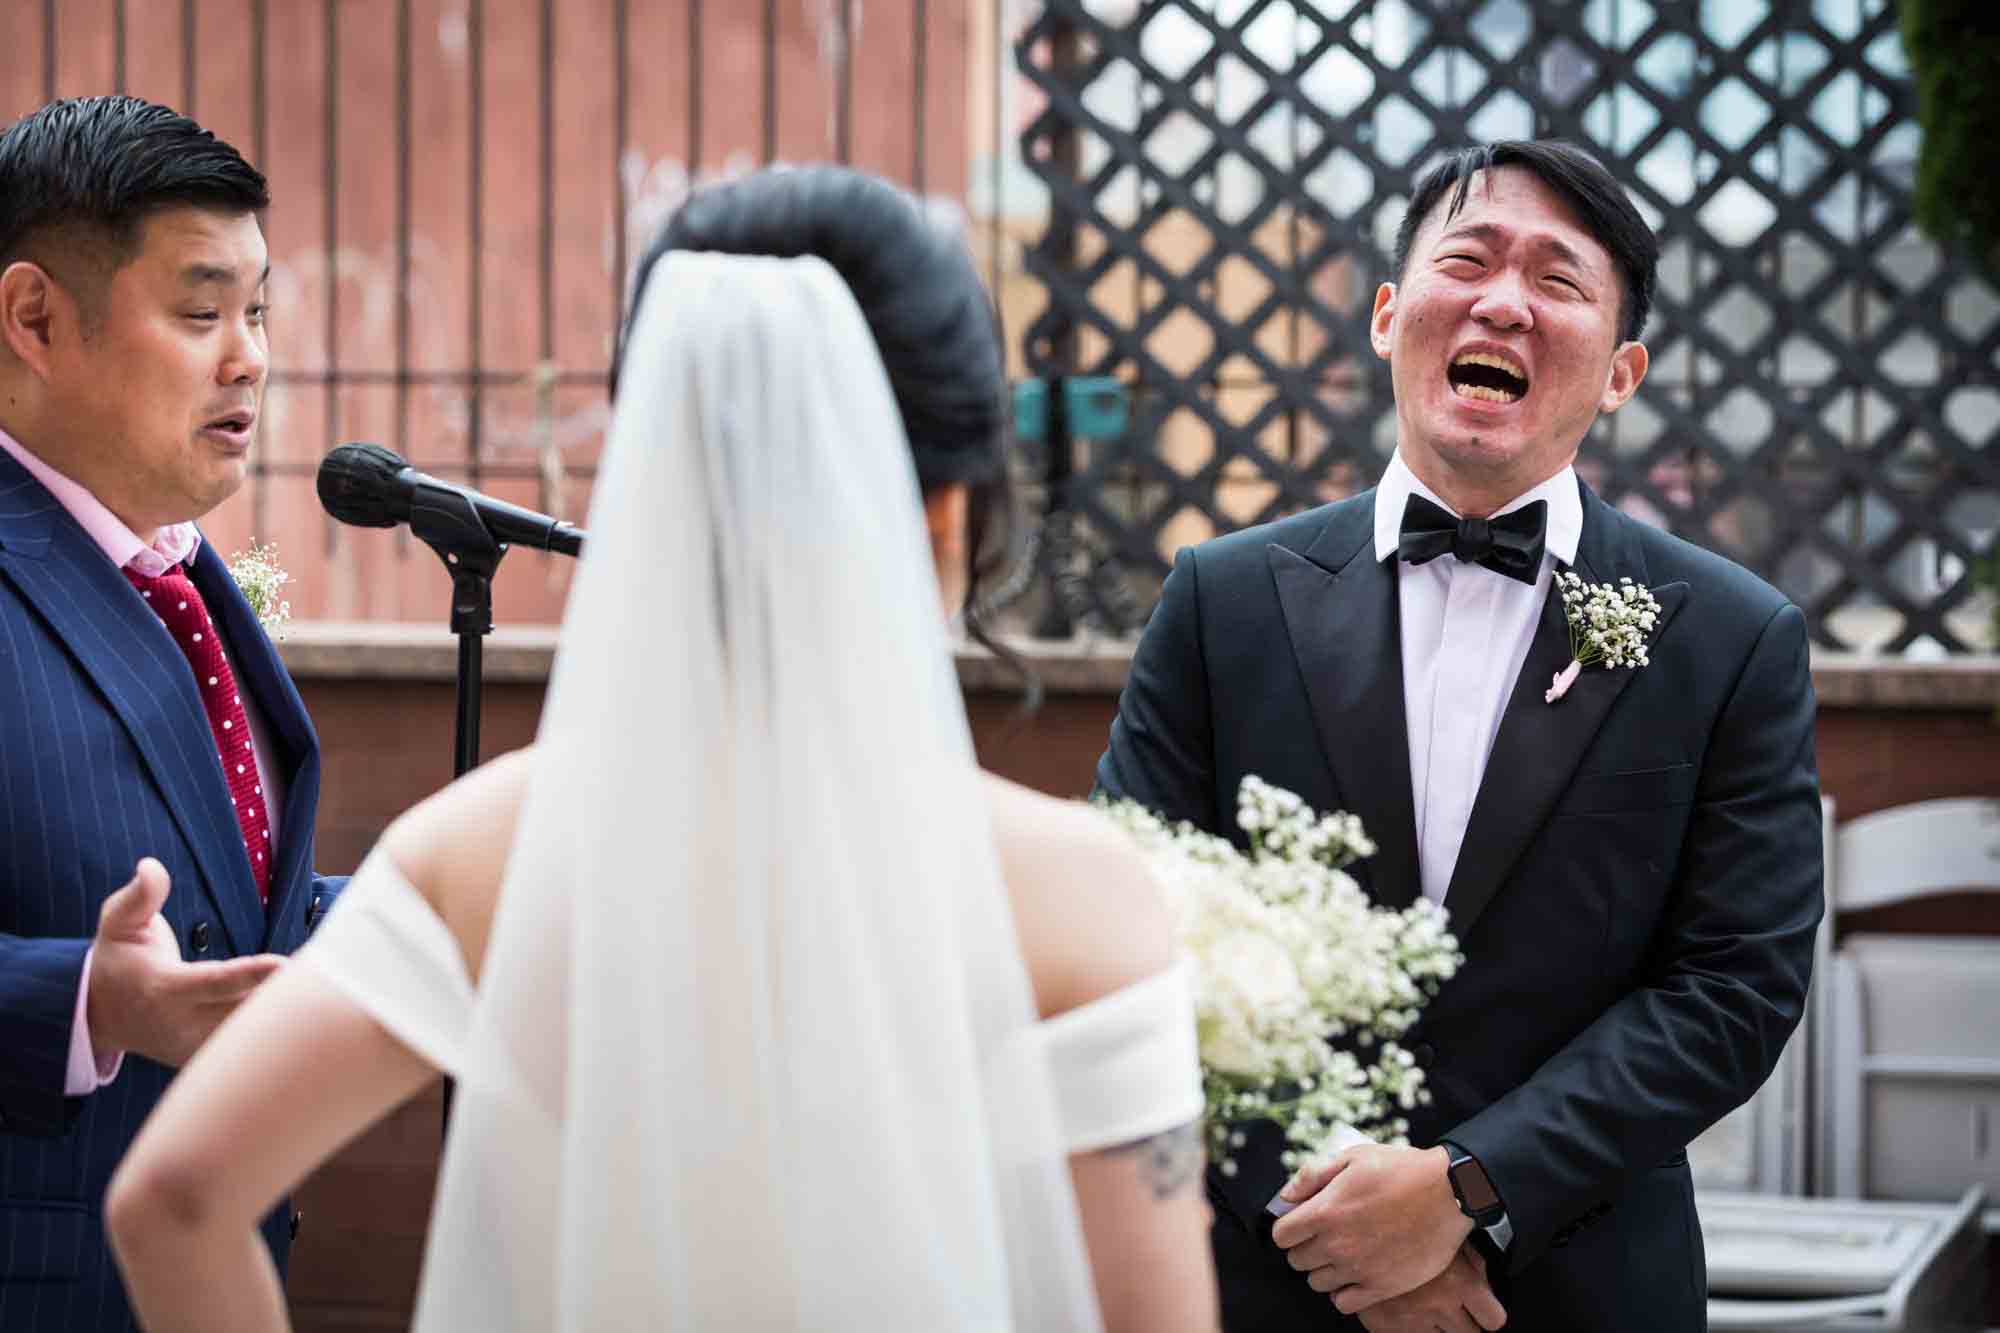 Groom laughing during ceremony at a Sheraton LaGuardia East Hotel wedding